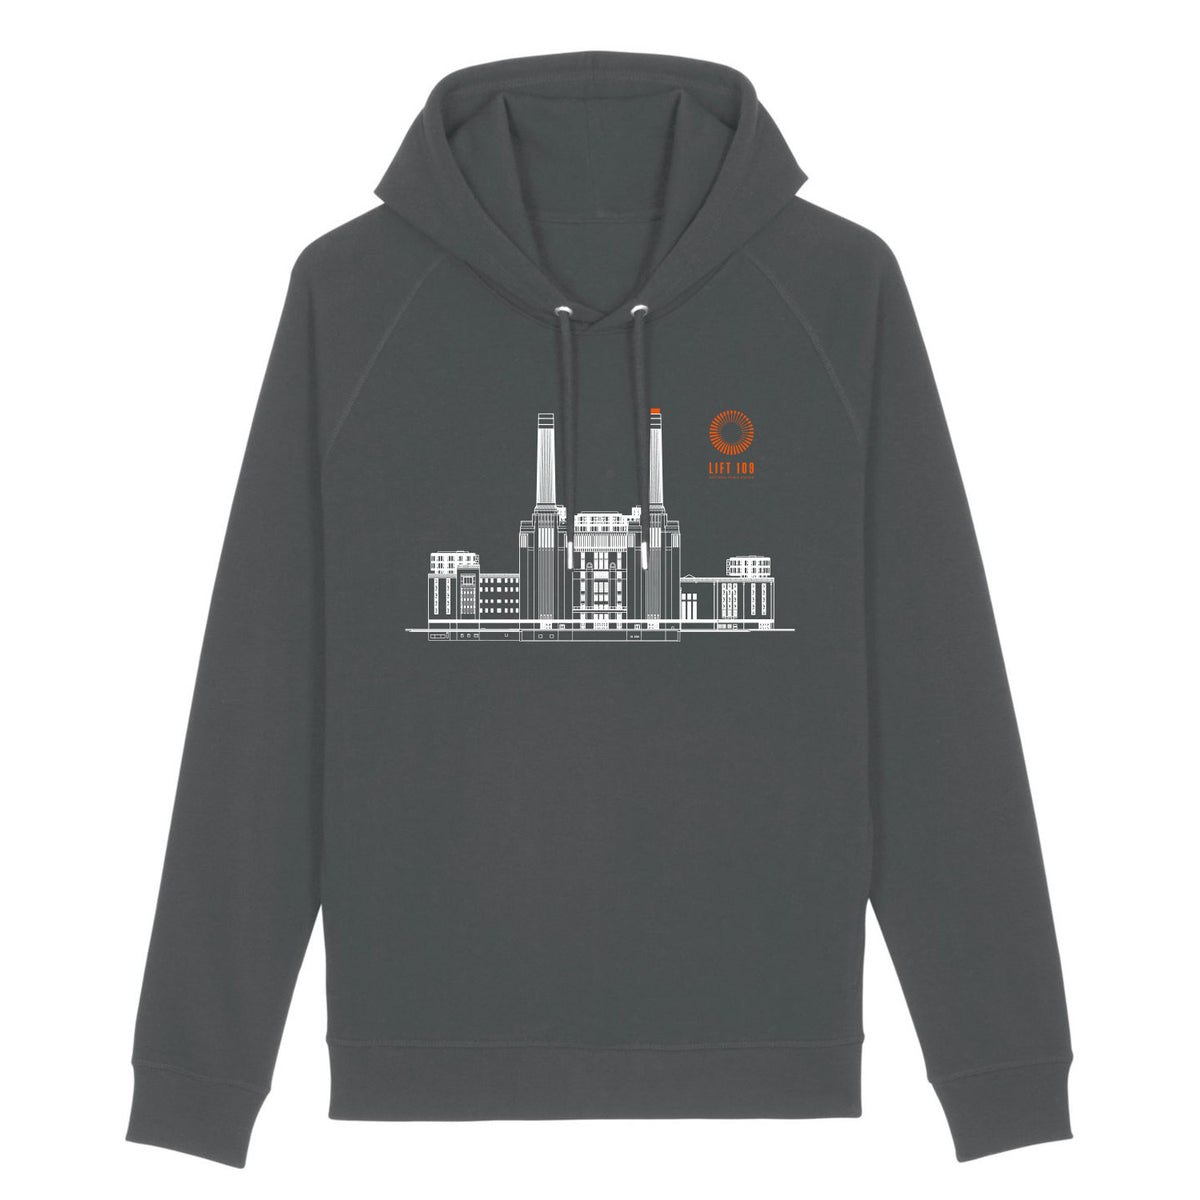 Architectural Drawing - Grey Unisex Hoodie